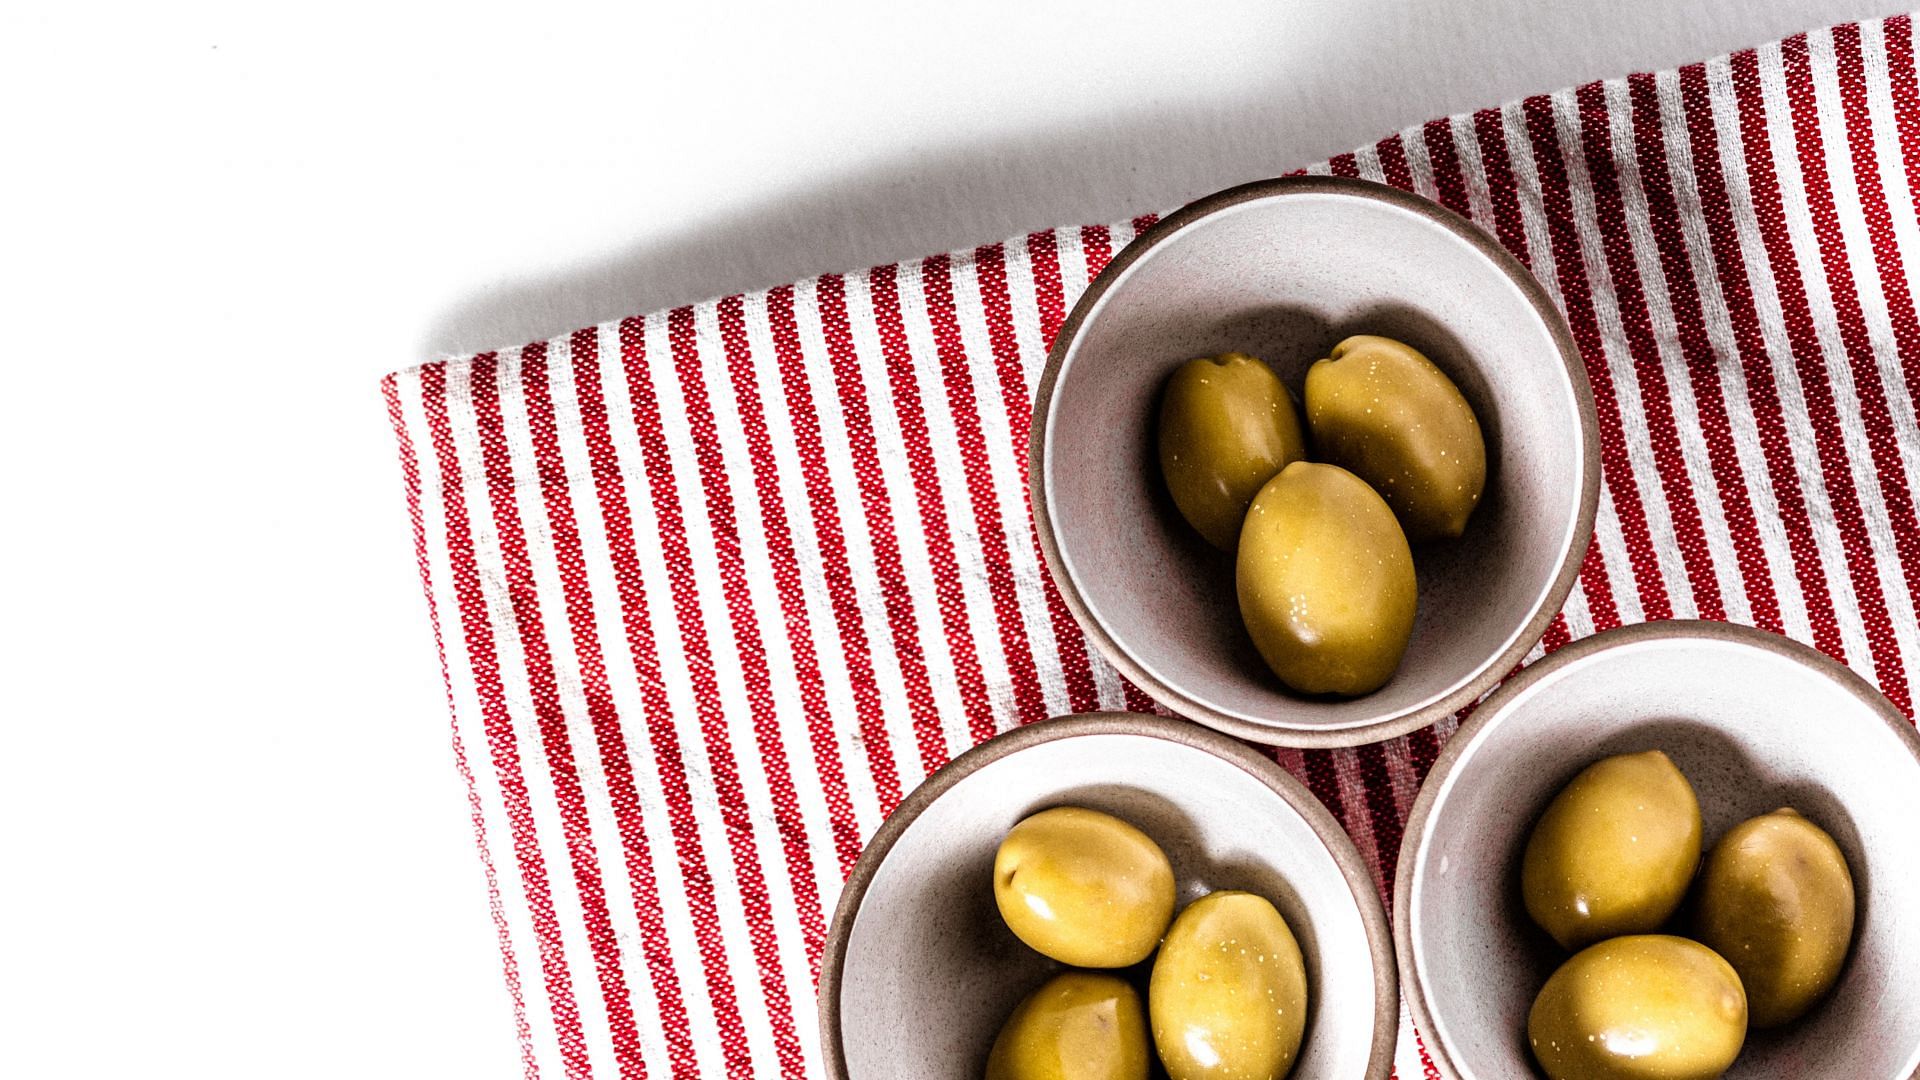 Green Olives are Tasty and Nutritious (Image via Unsplash/Kier in Sight)